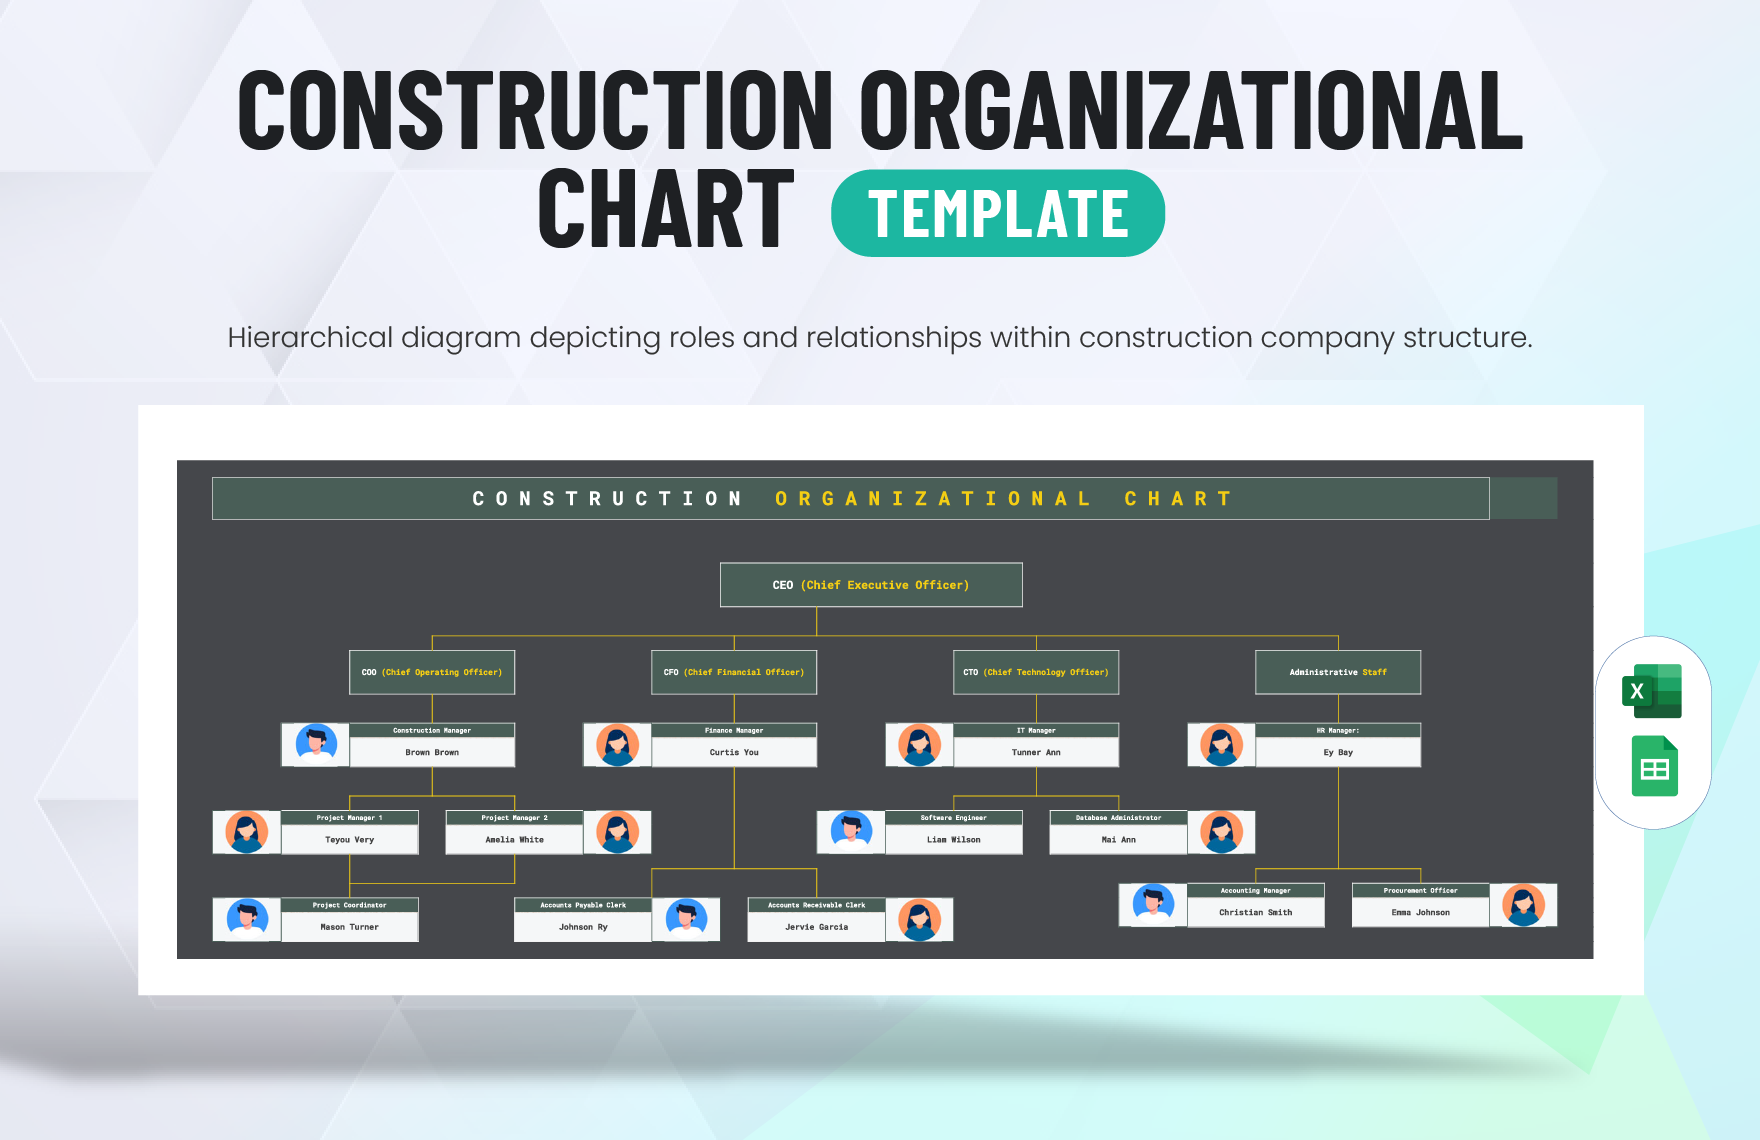 Construction Organizational Chart Template in Excel, Google Sheets